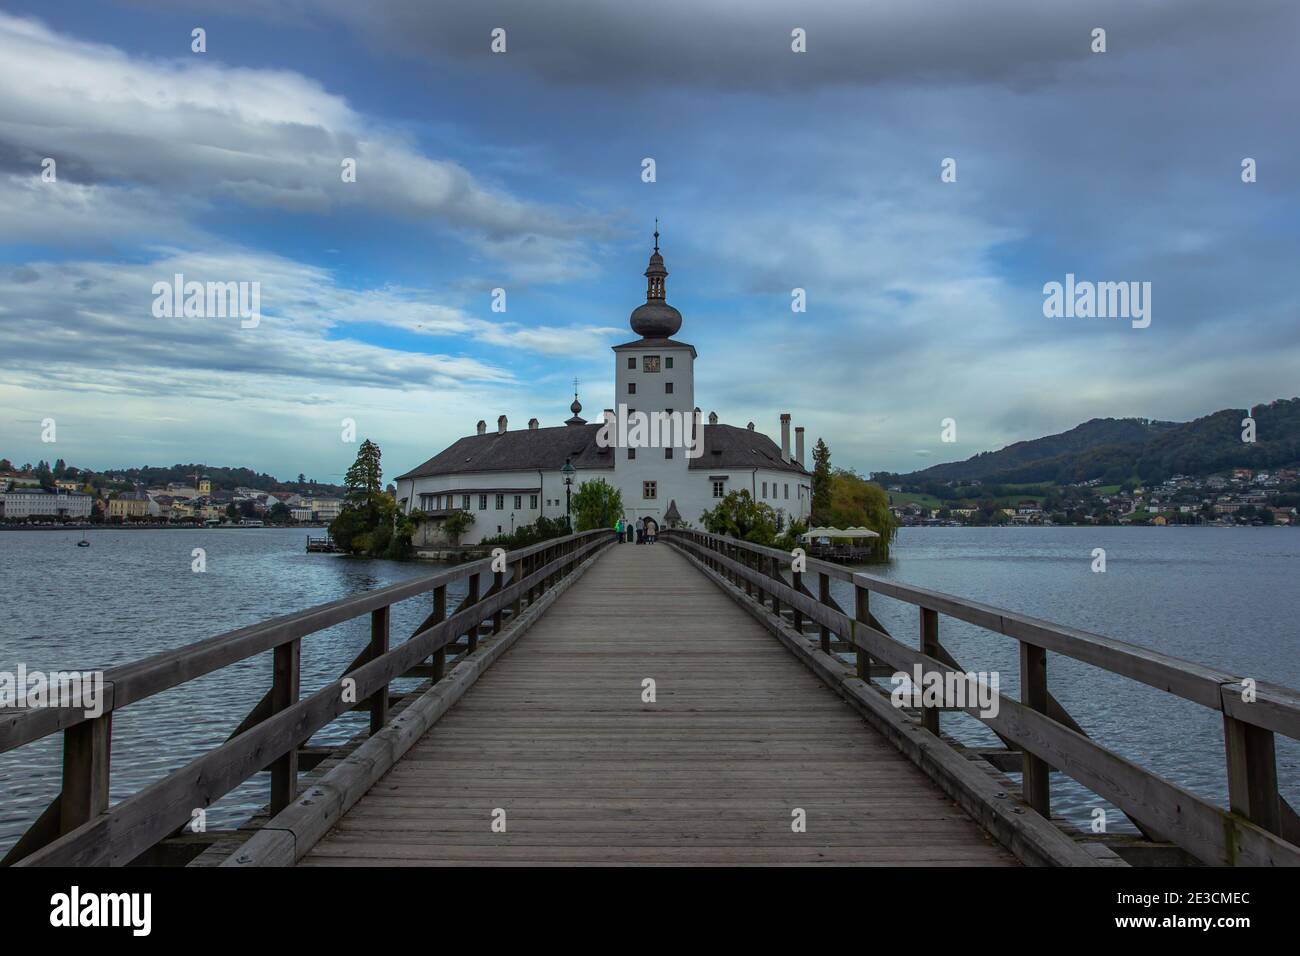 Gmunden, Austria - October 2, 2020. Summer resort town in Upper Austria situated next to the lake Traunsee and surrounded by high mountains. Main sigh Stock Photo